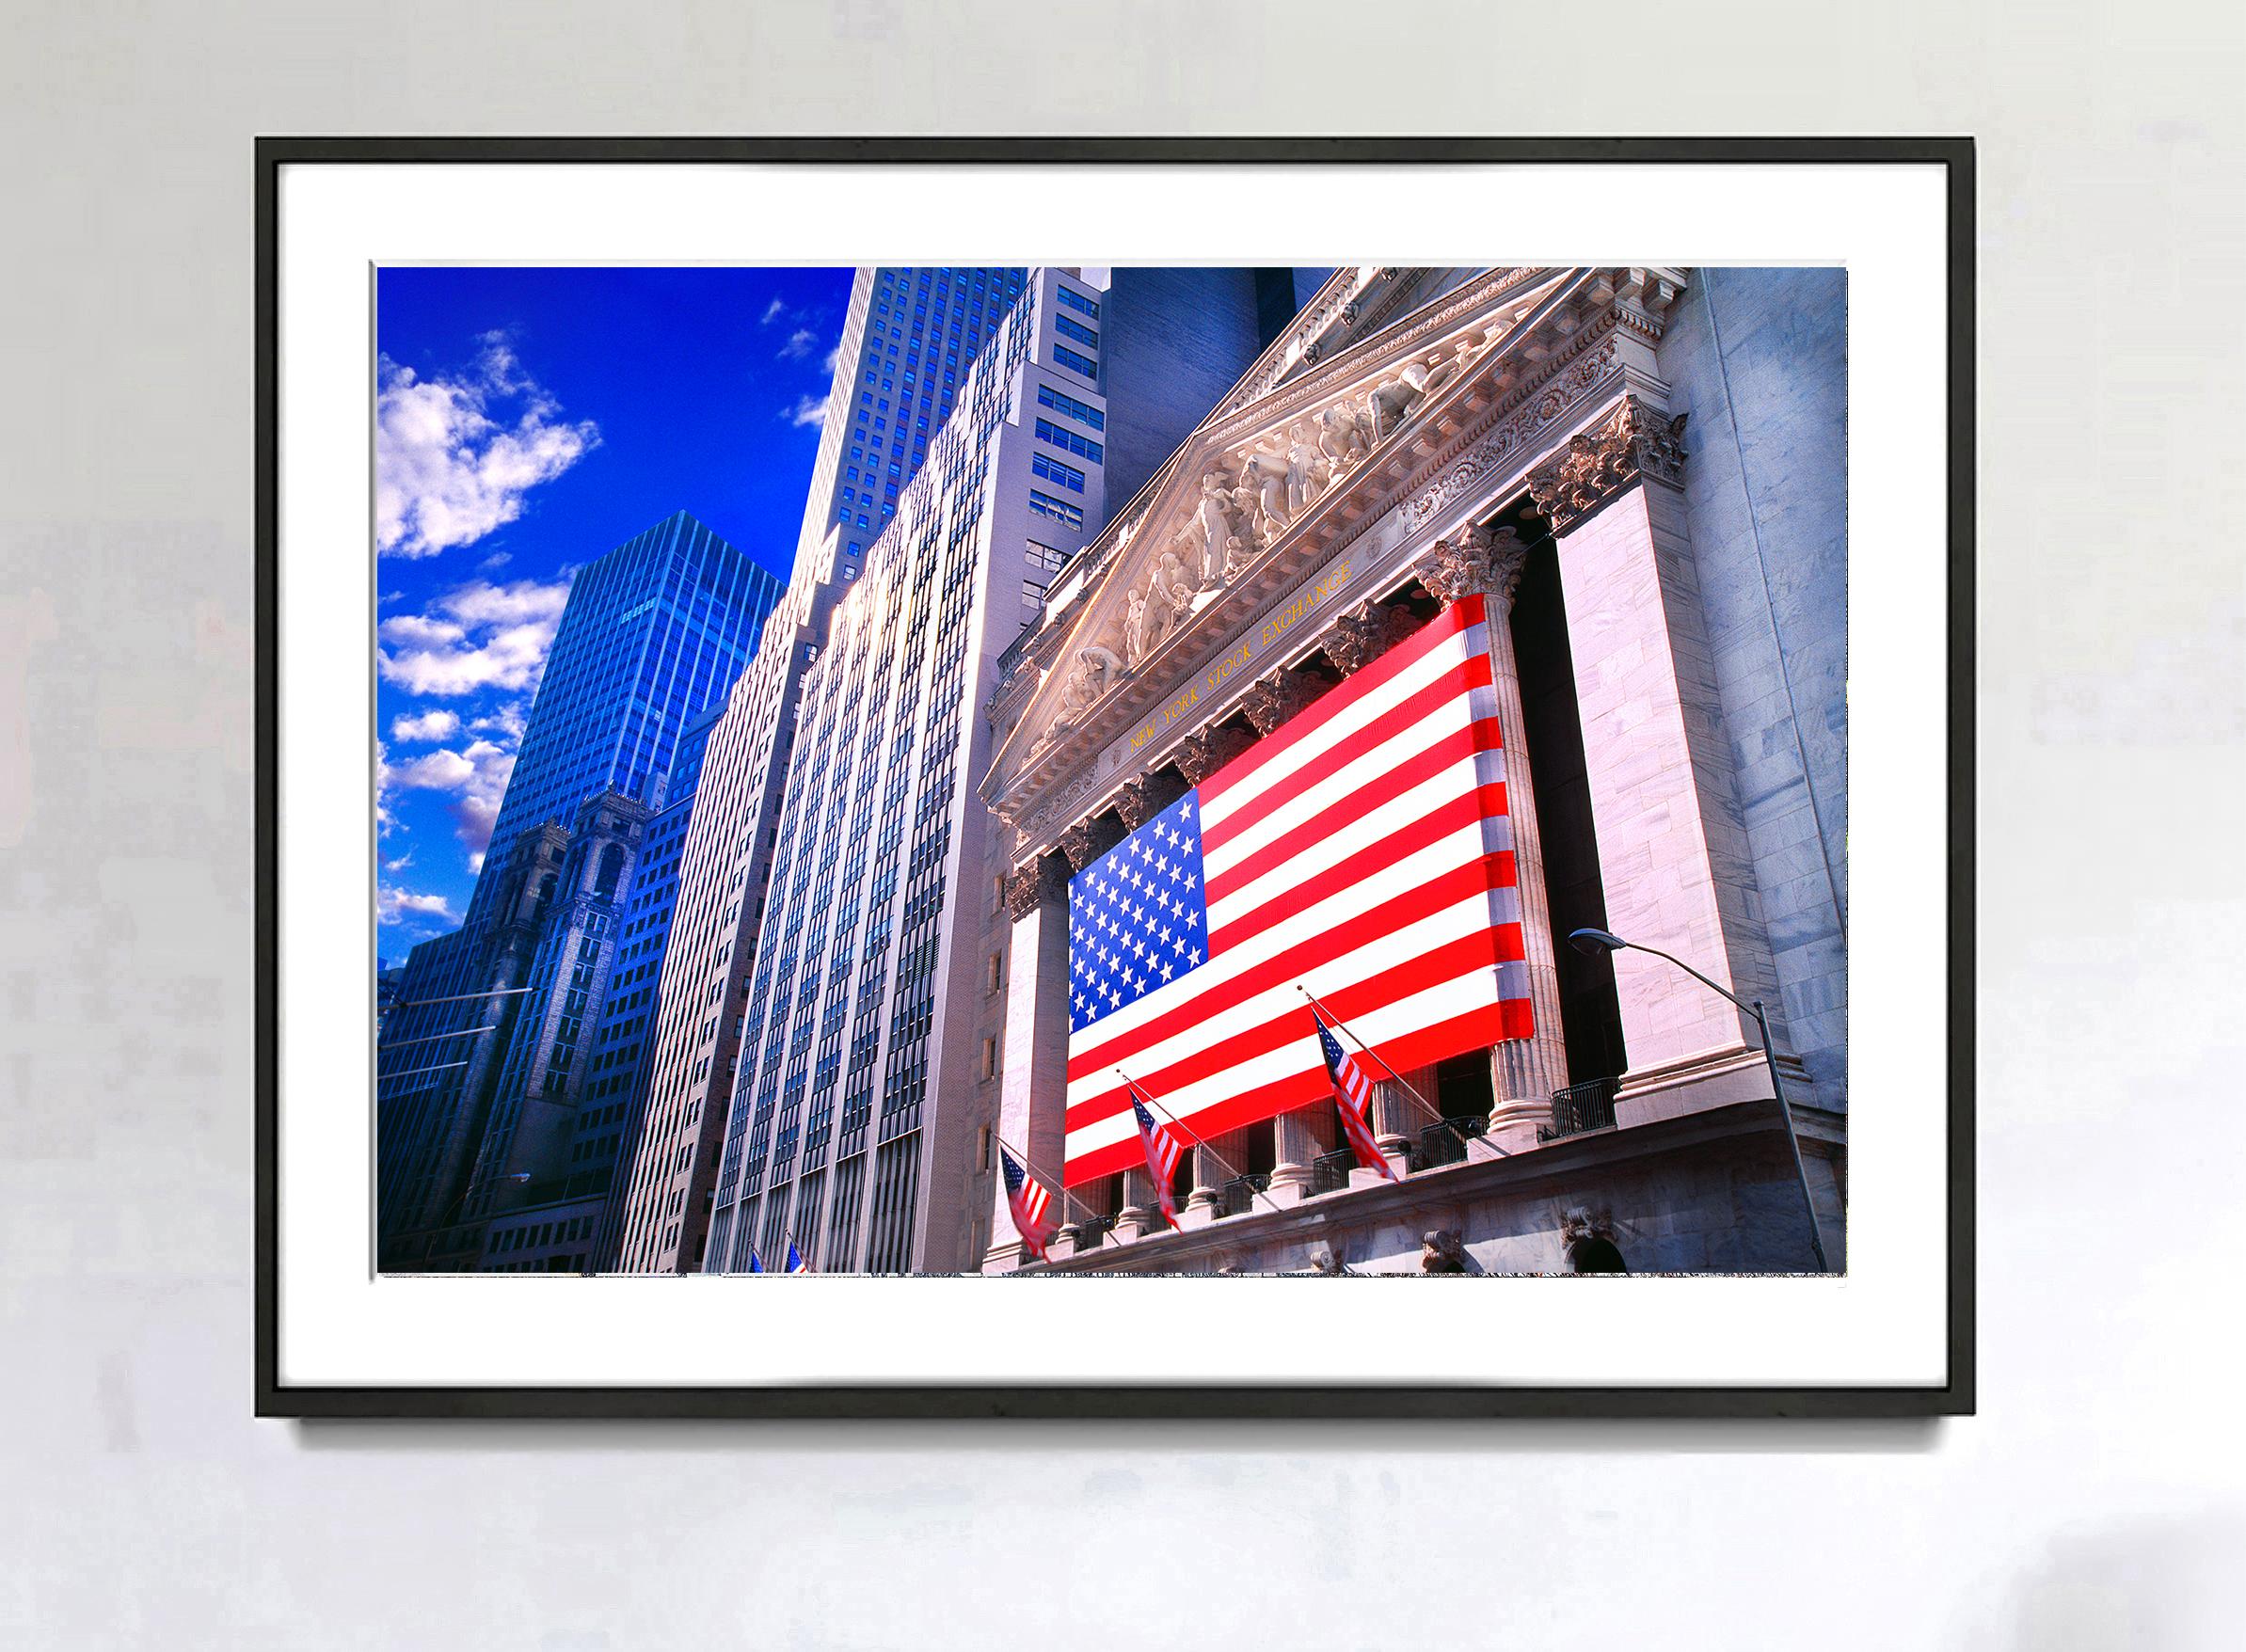 New York Stock Exchange with American Flag  - American Capitalism - Photograph by Mitchell Funk